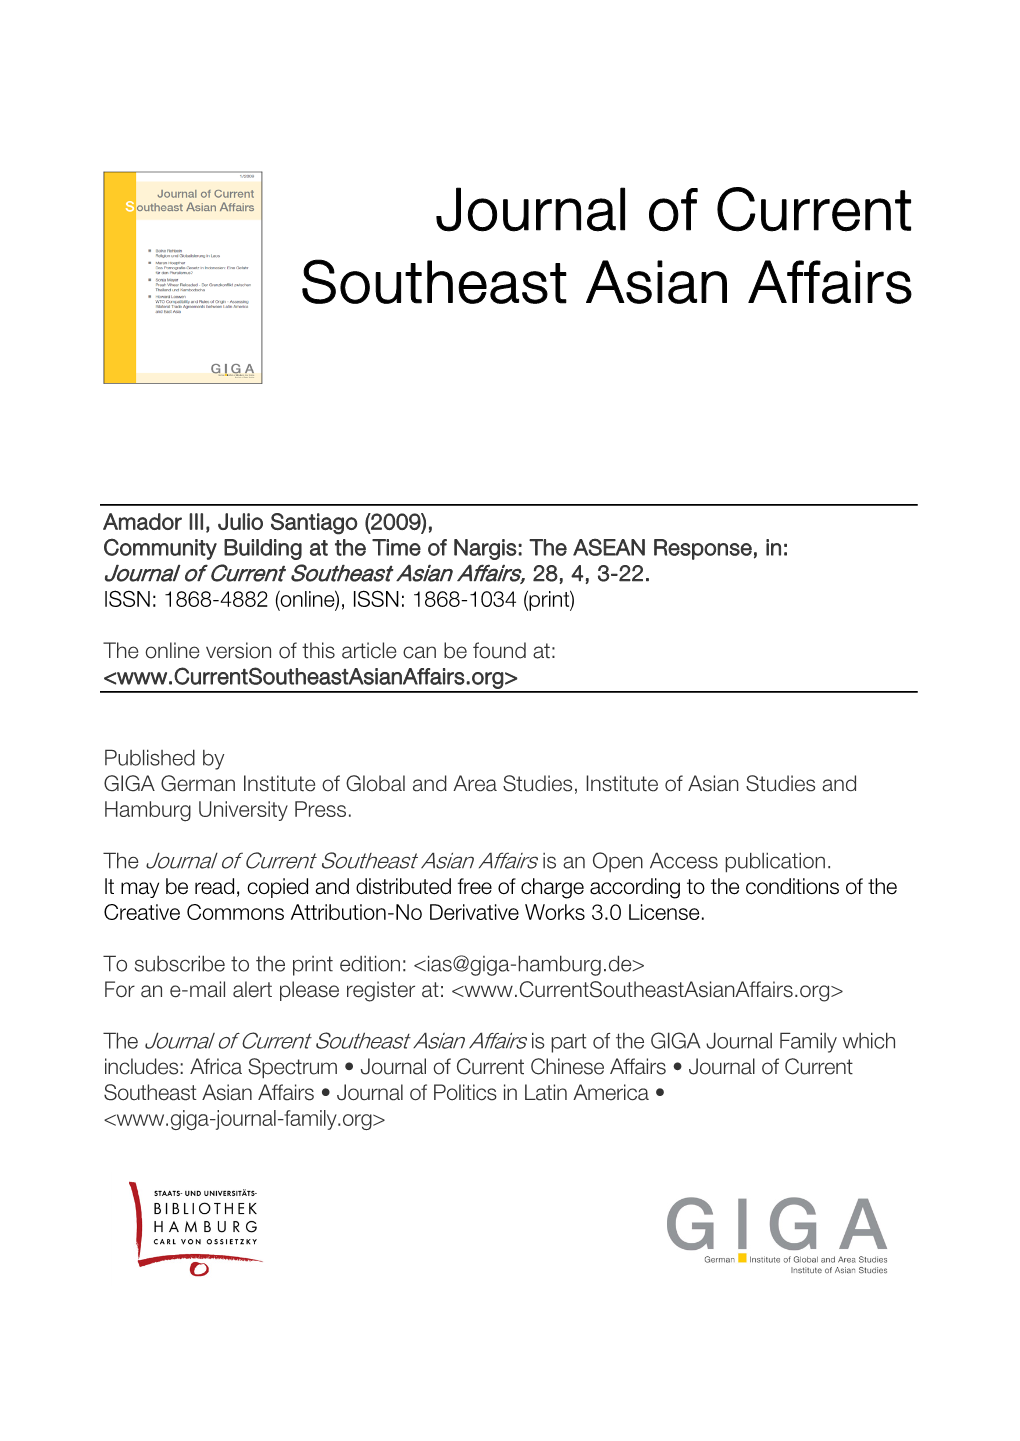 Community Building at the Time of Nargis: the ASEAN Response, In: Journal of Current Southeast Asian Affairs, 28, 4, 3-22